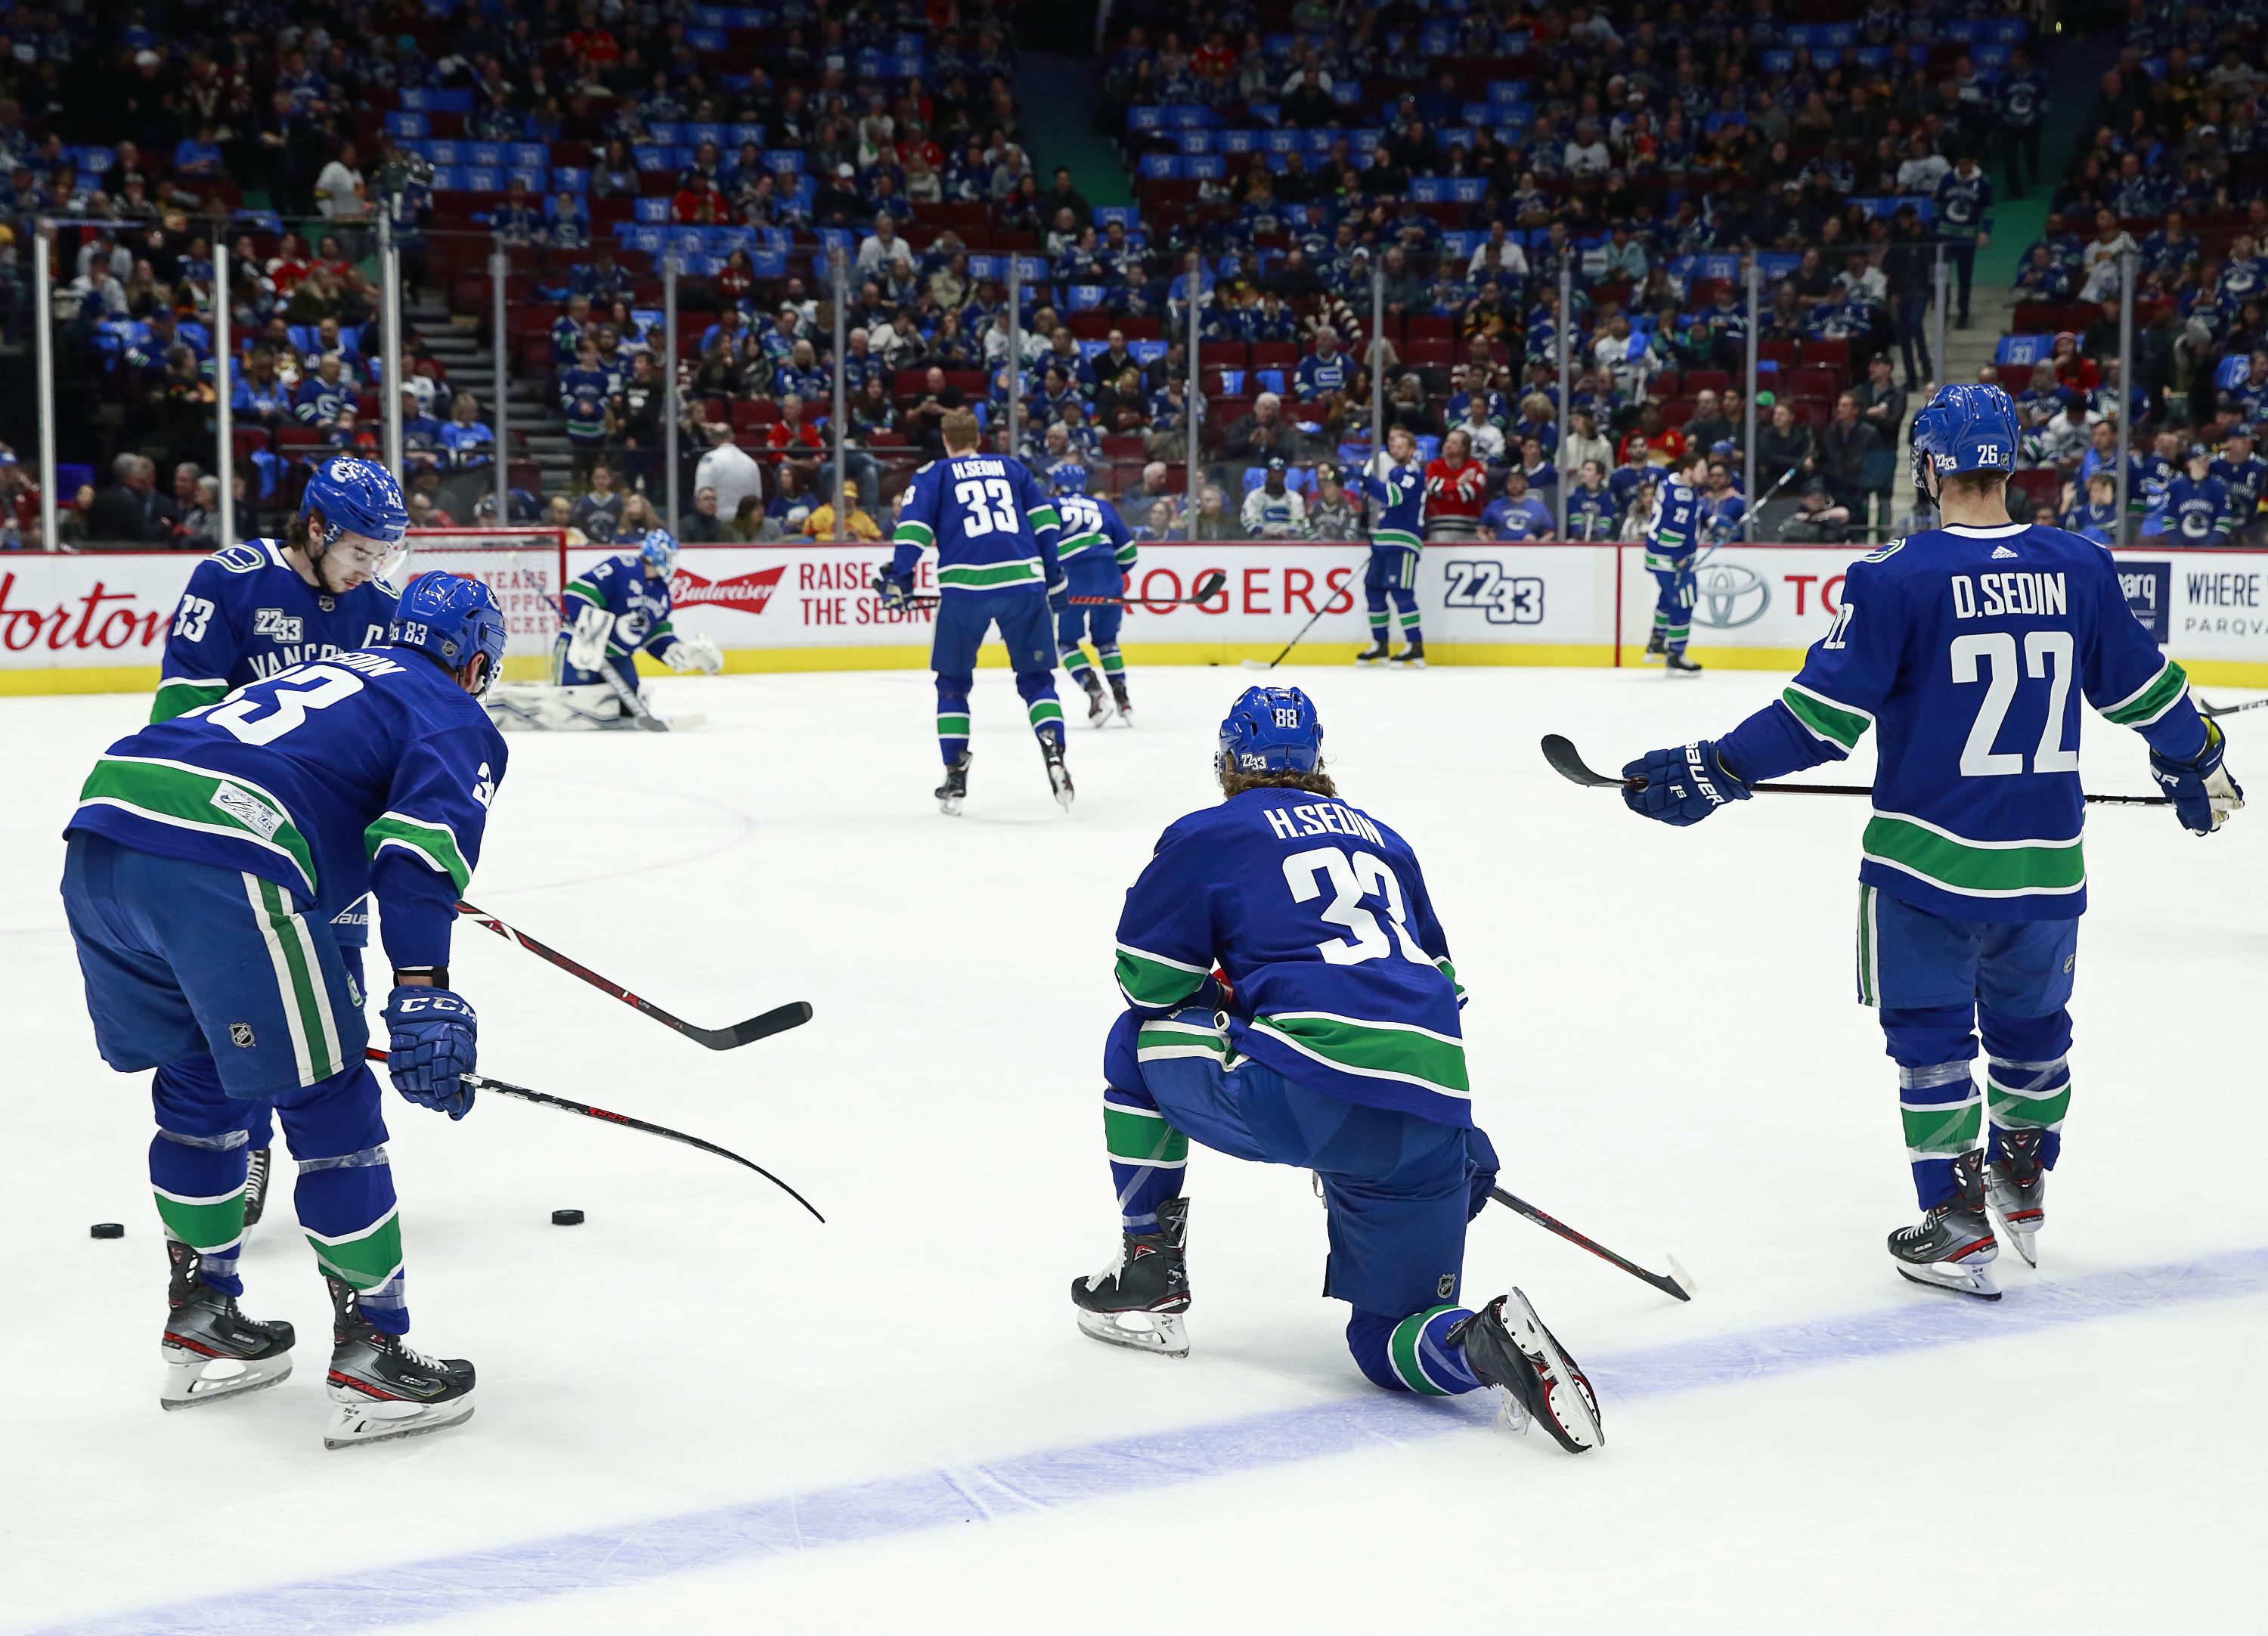 Visiting Canucks looking to strike first vs. Leafs